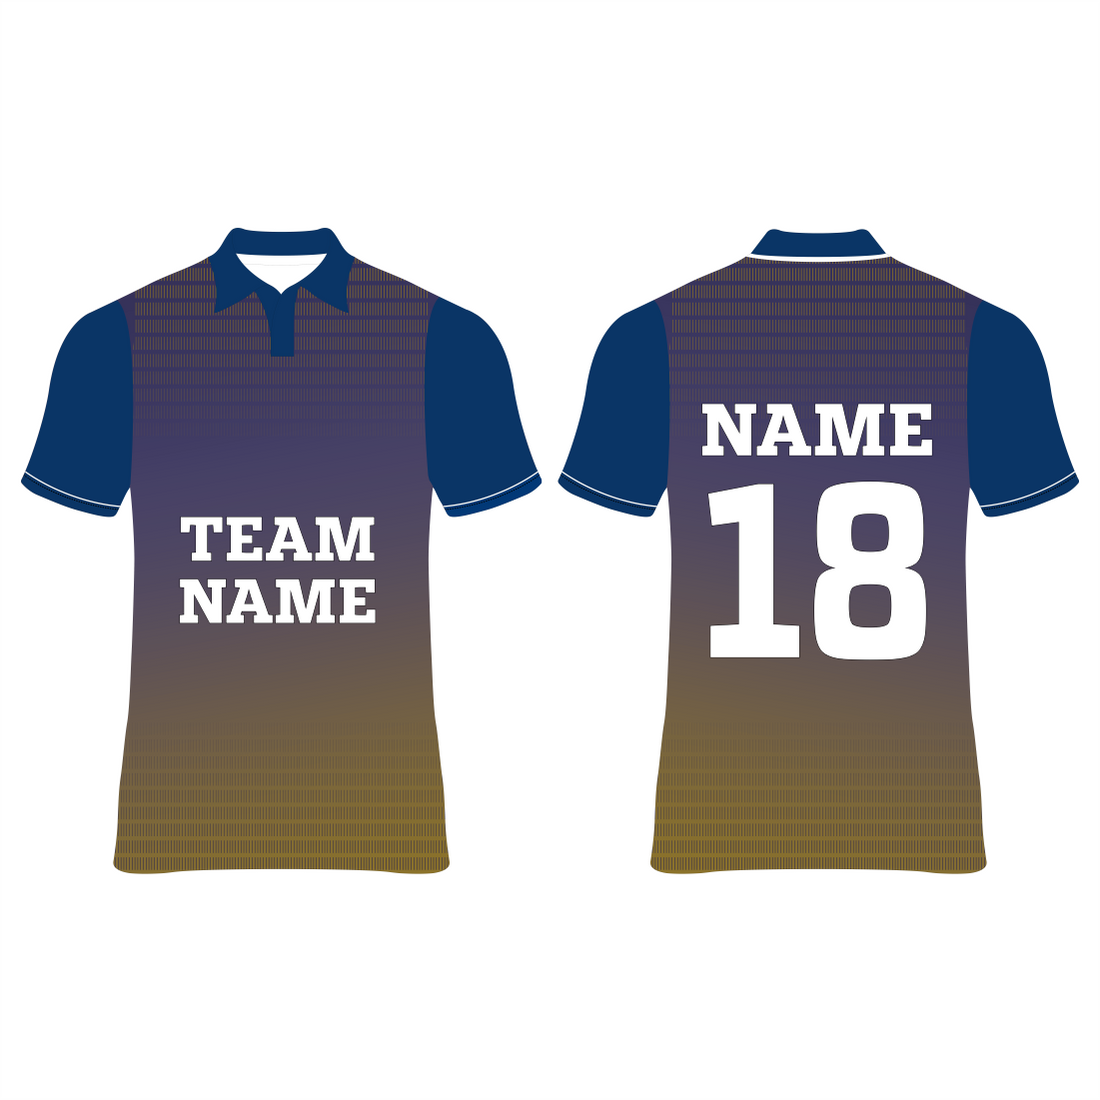 NEXT PRINT All Over Printed Customized Sublimation T-Shirt Unisex Sports Kolkata Knight Riders Cricket  Jersey Player Name & Number, Team Name And Logo.NP050000